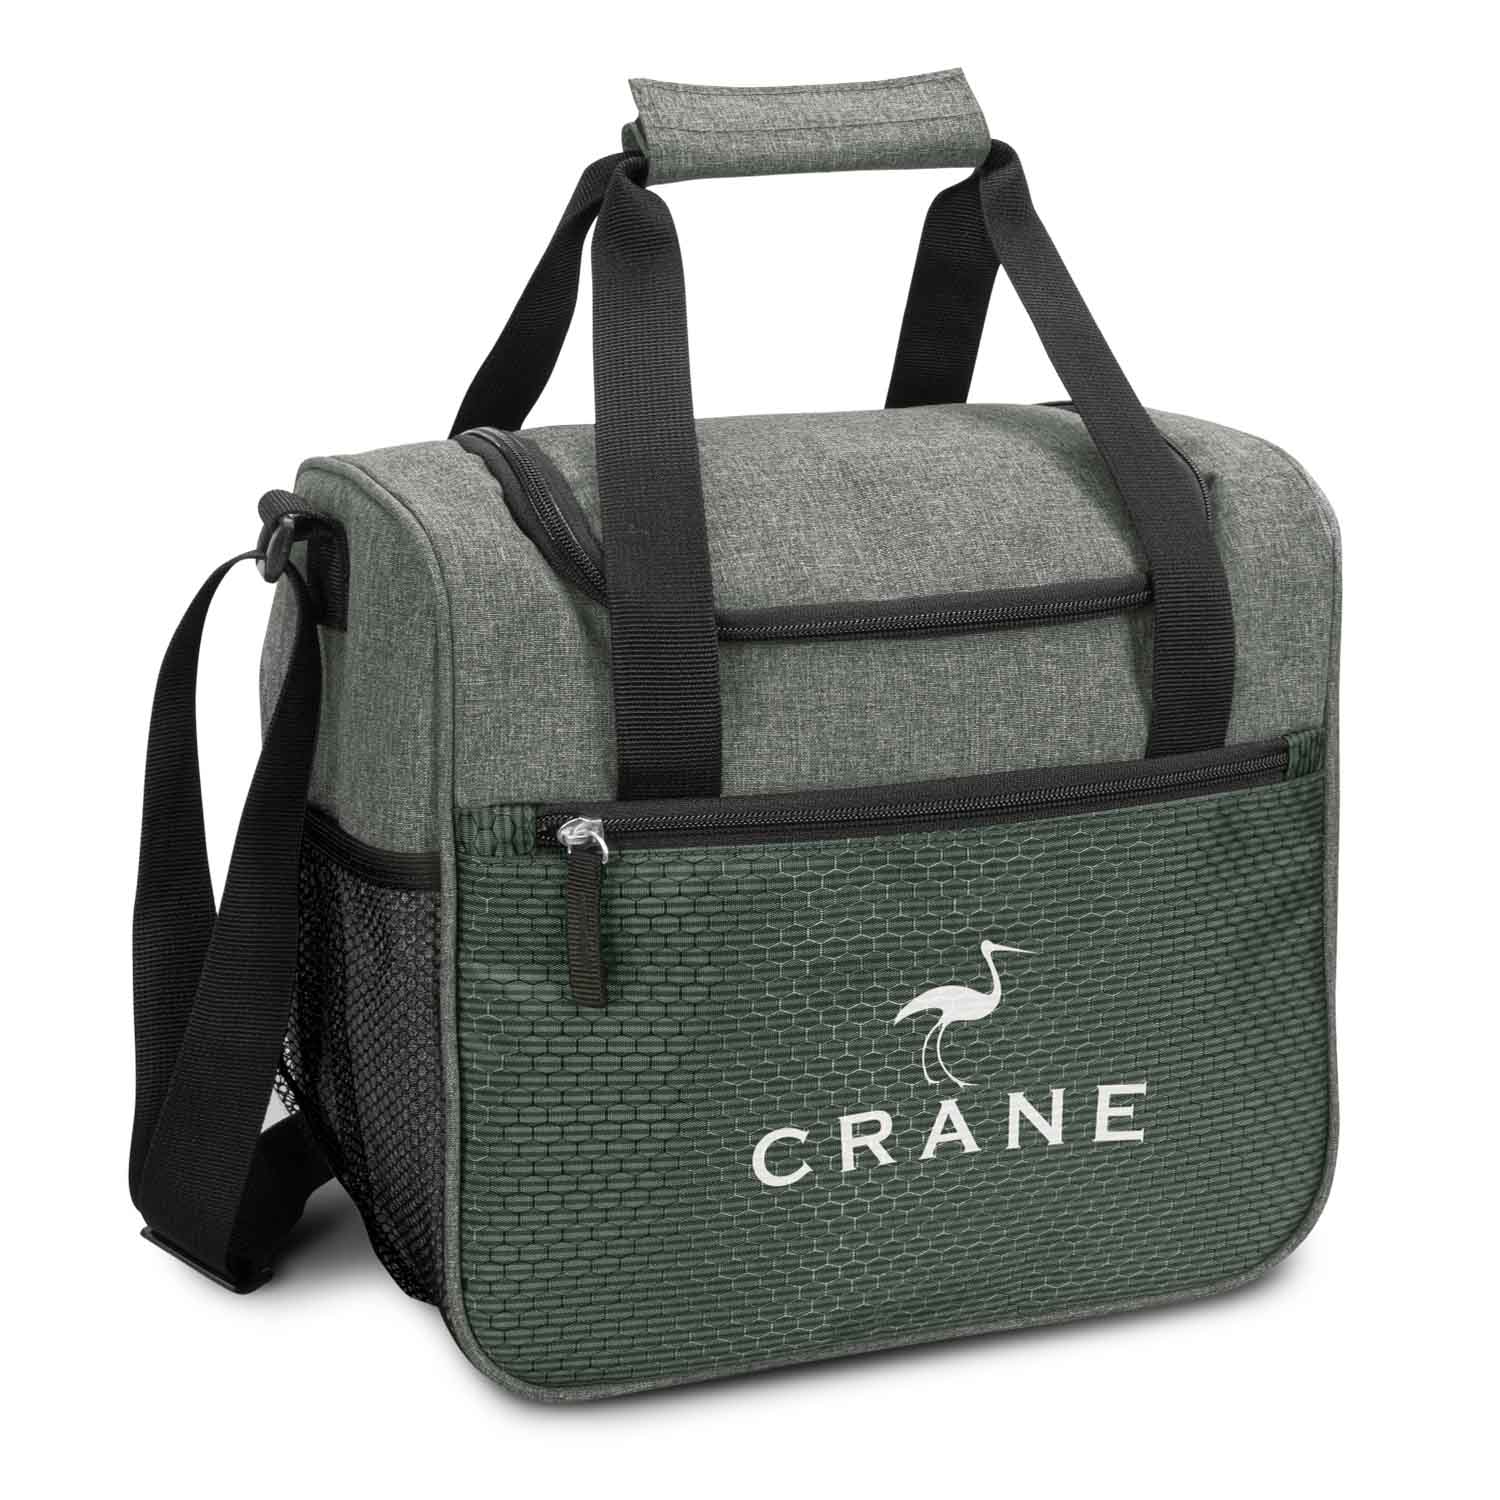 Promotional Velocity Cooler Bags Online Perth